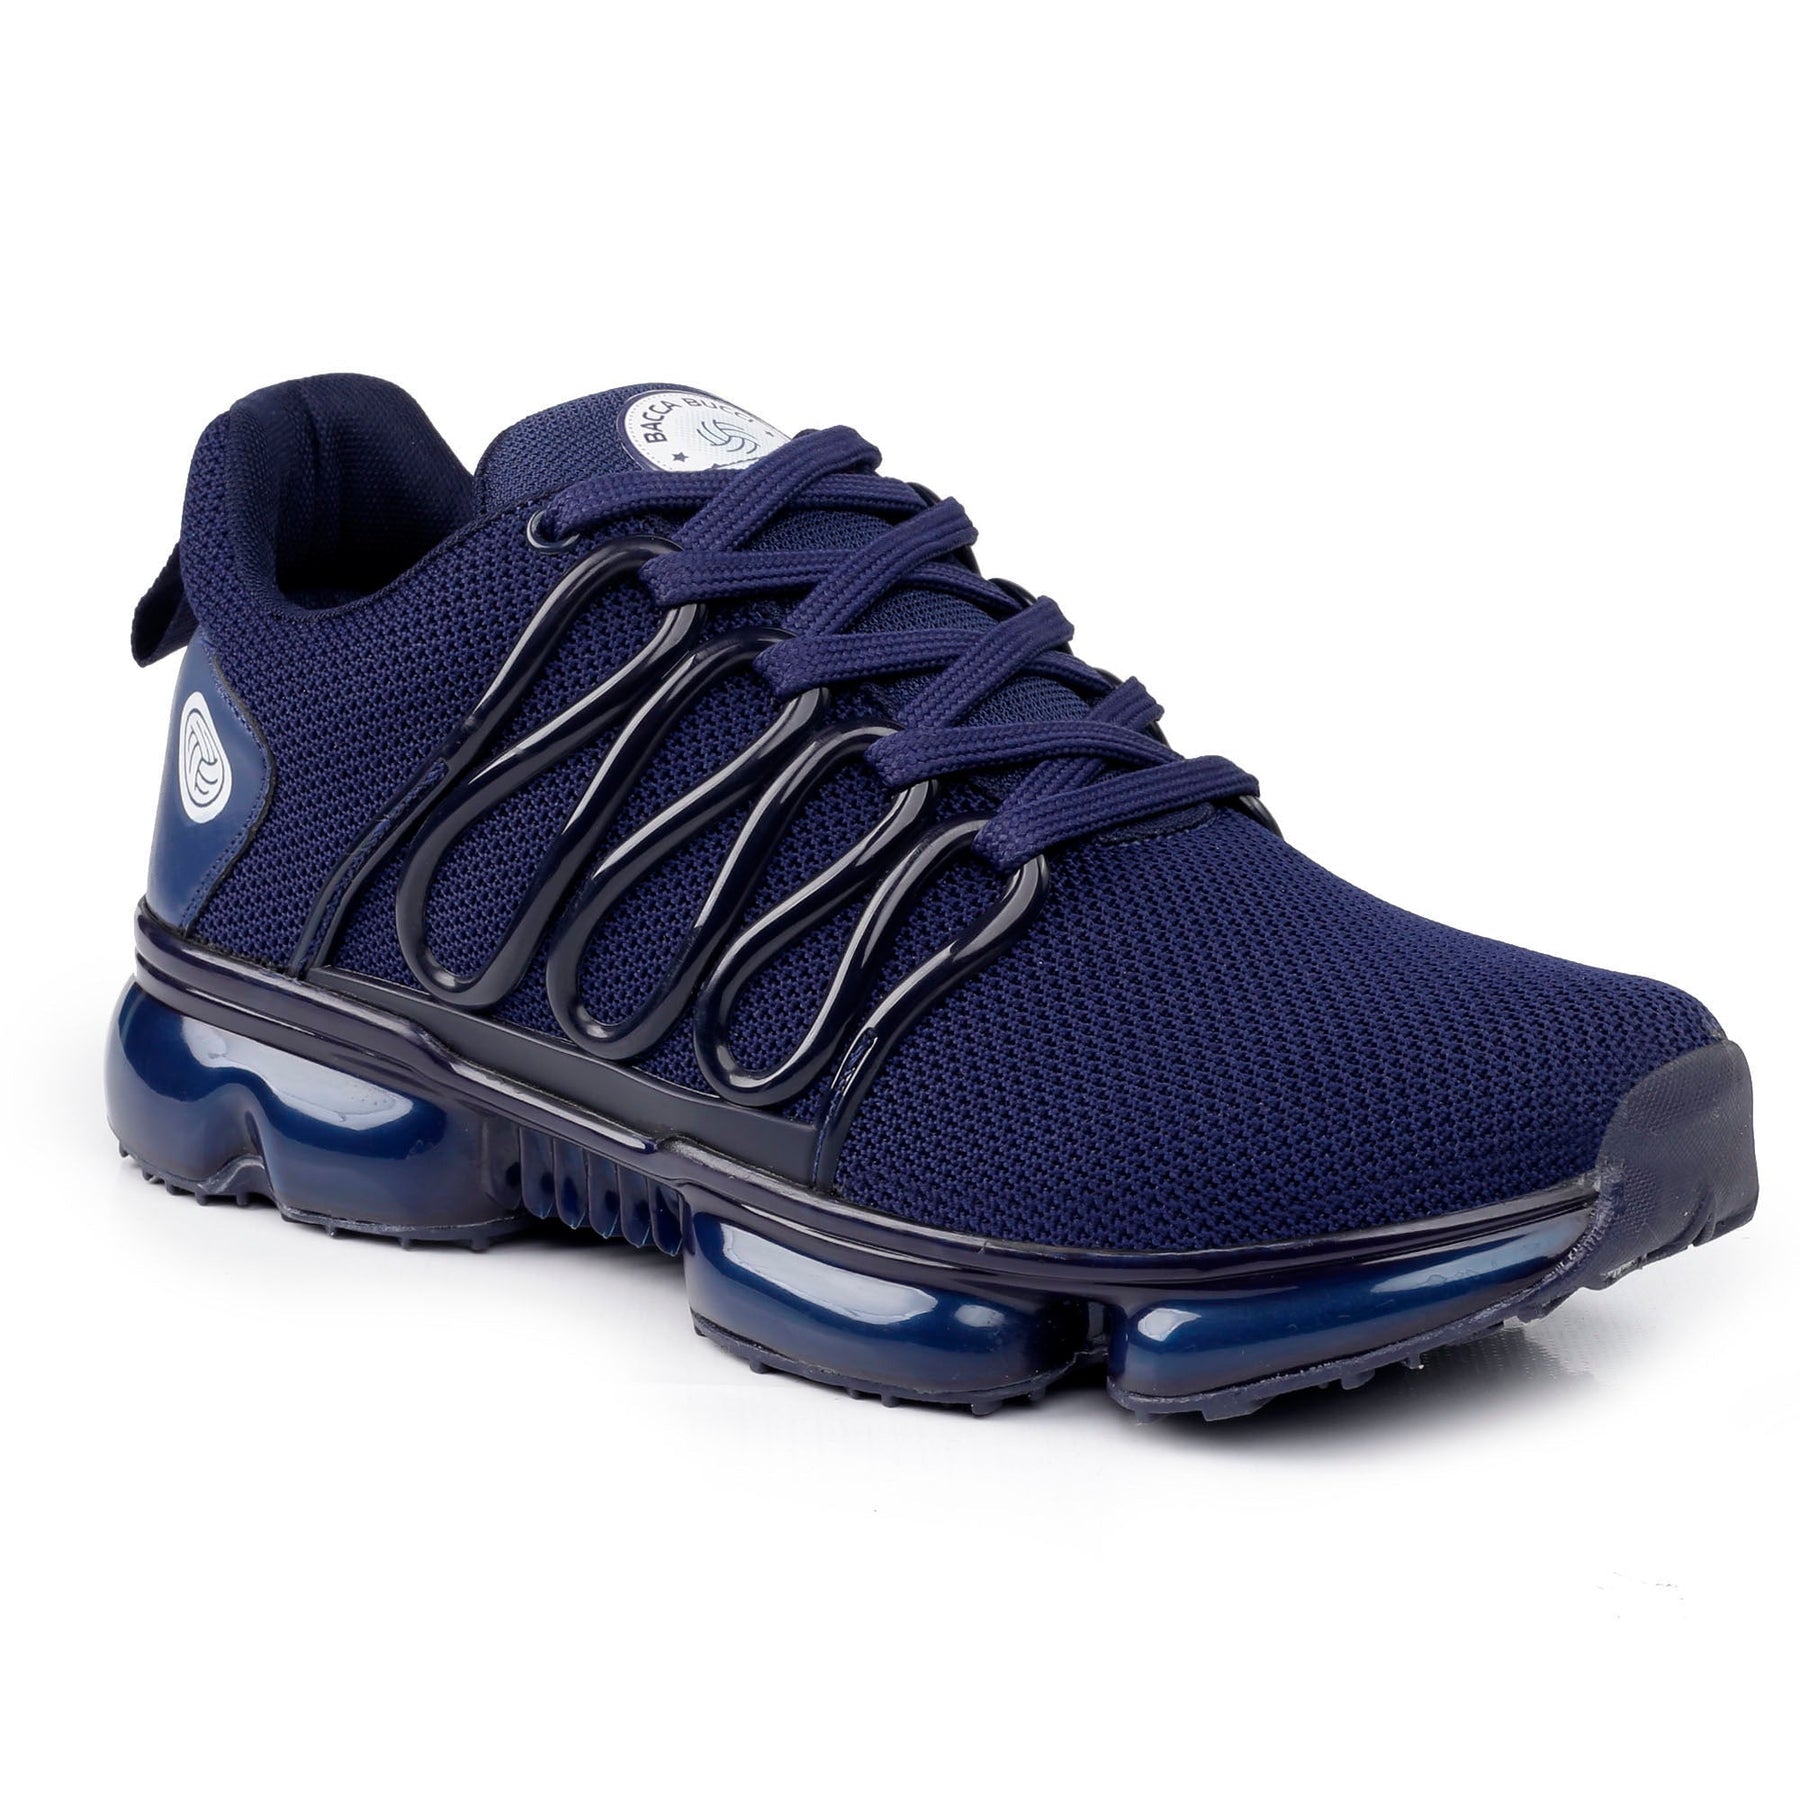 Bacca Bucci® Men's BOLT Max-Comfort Trail Running Shoes for Tough Surface Run